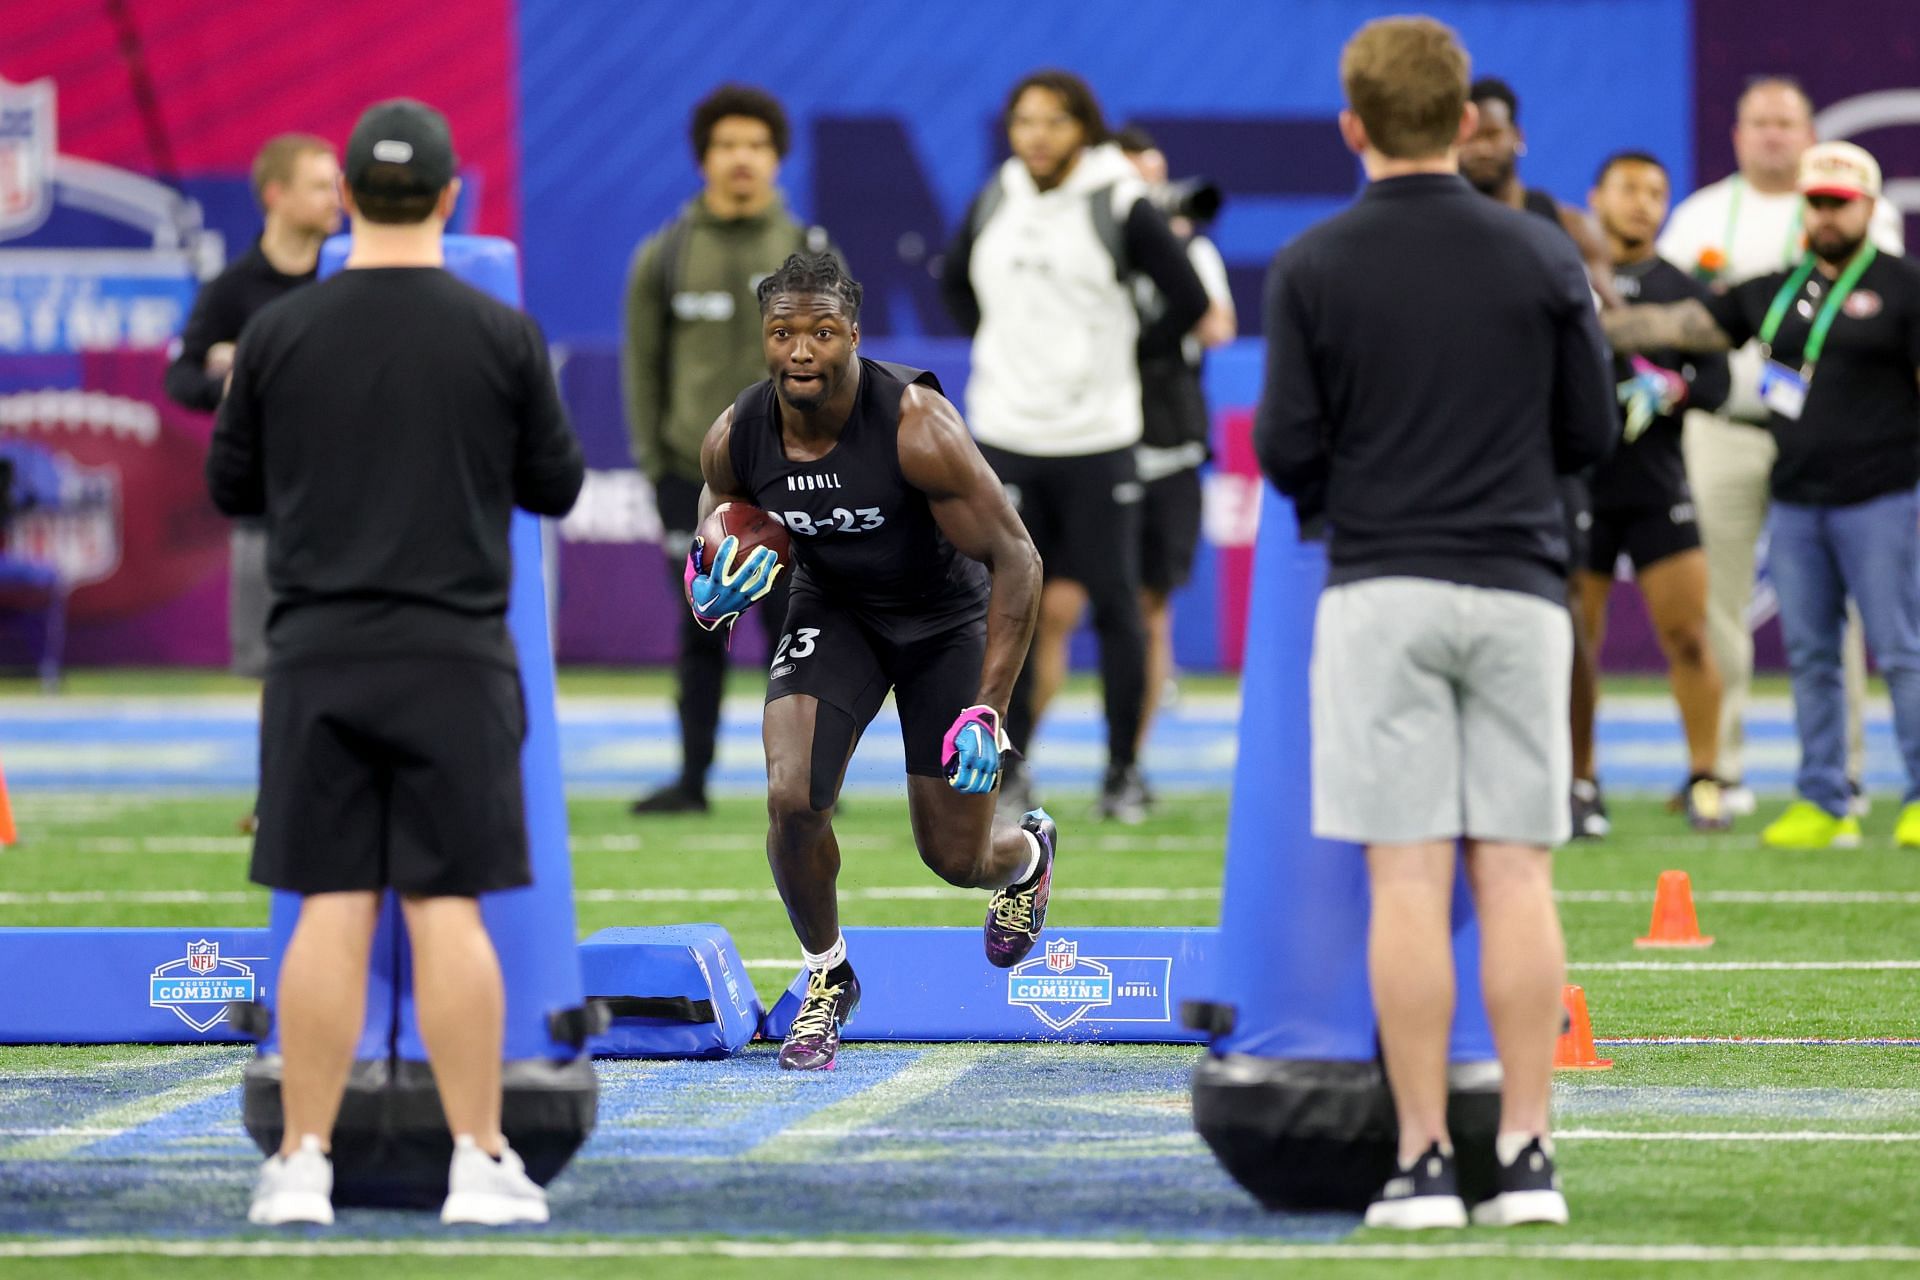 Is the NFL Combine only for college players? Exploring the criteria and